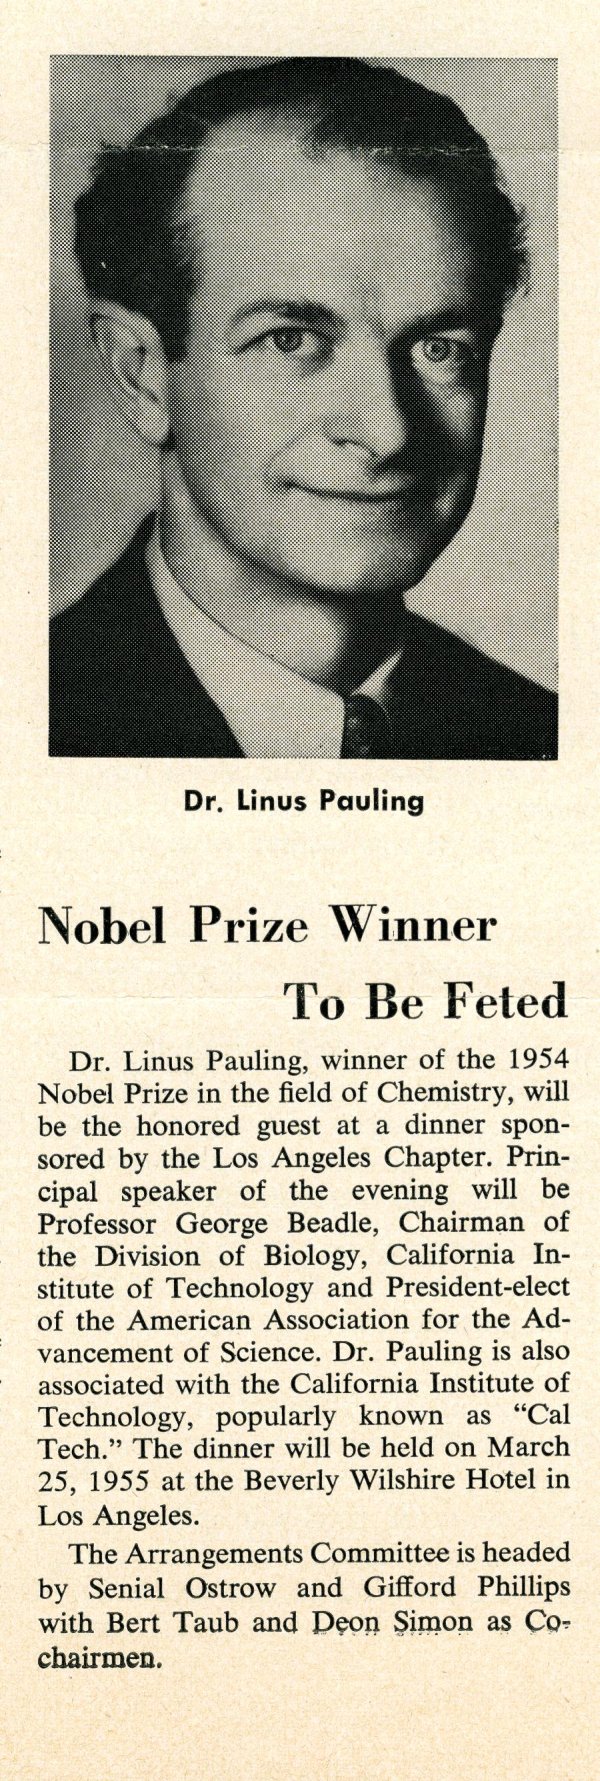 "Nobel Prize Winner to be Feted" Page 1. April 1955